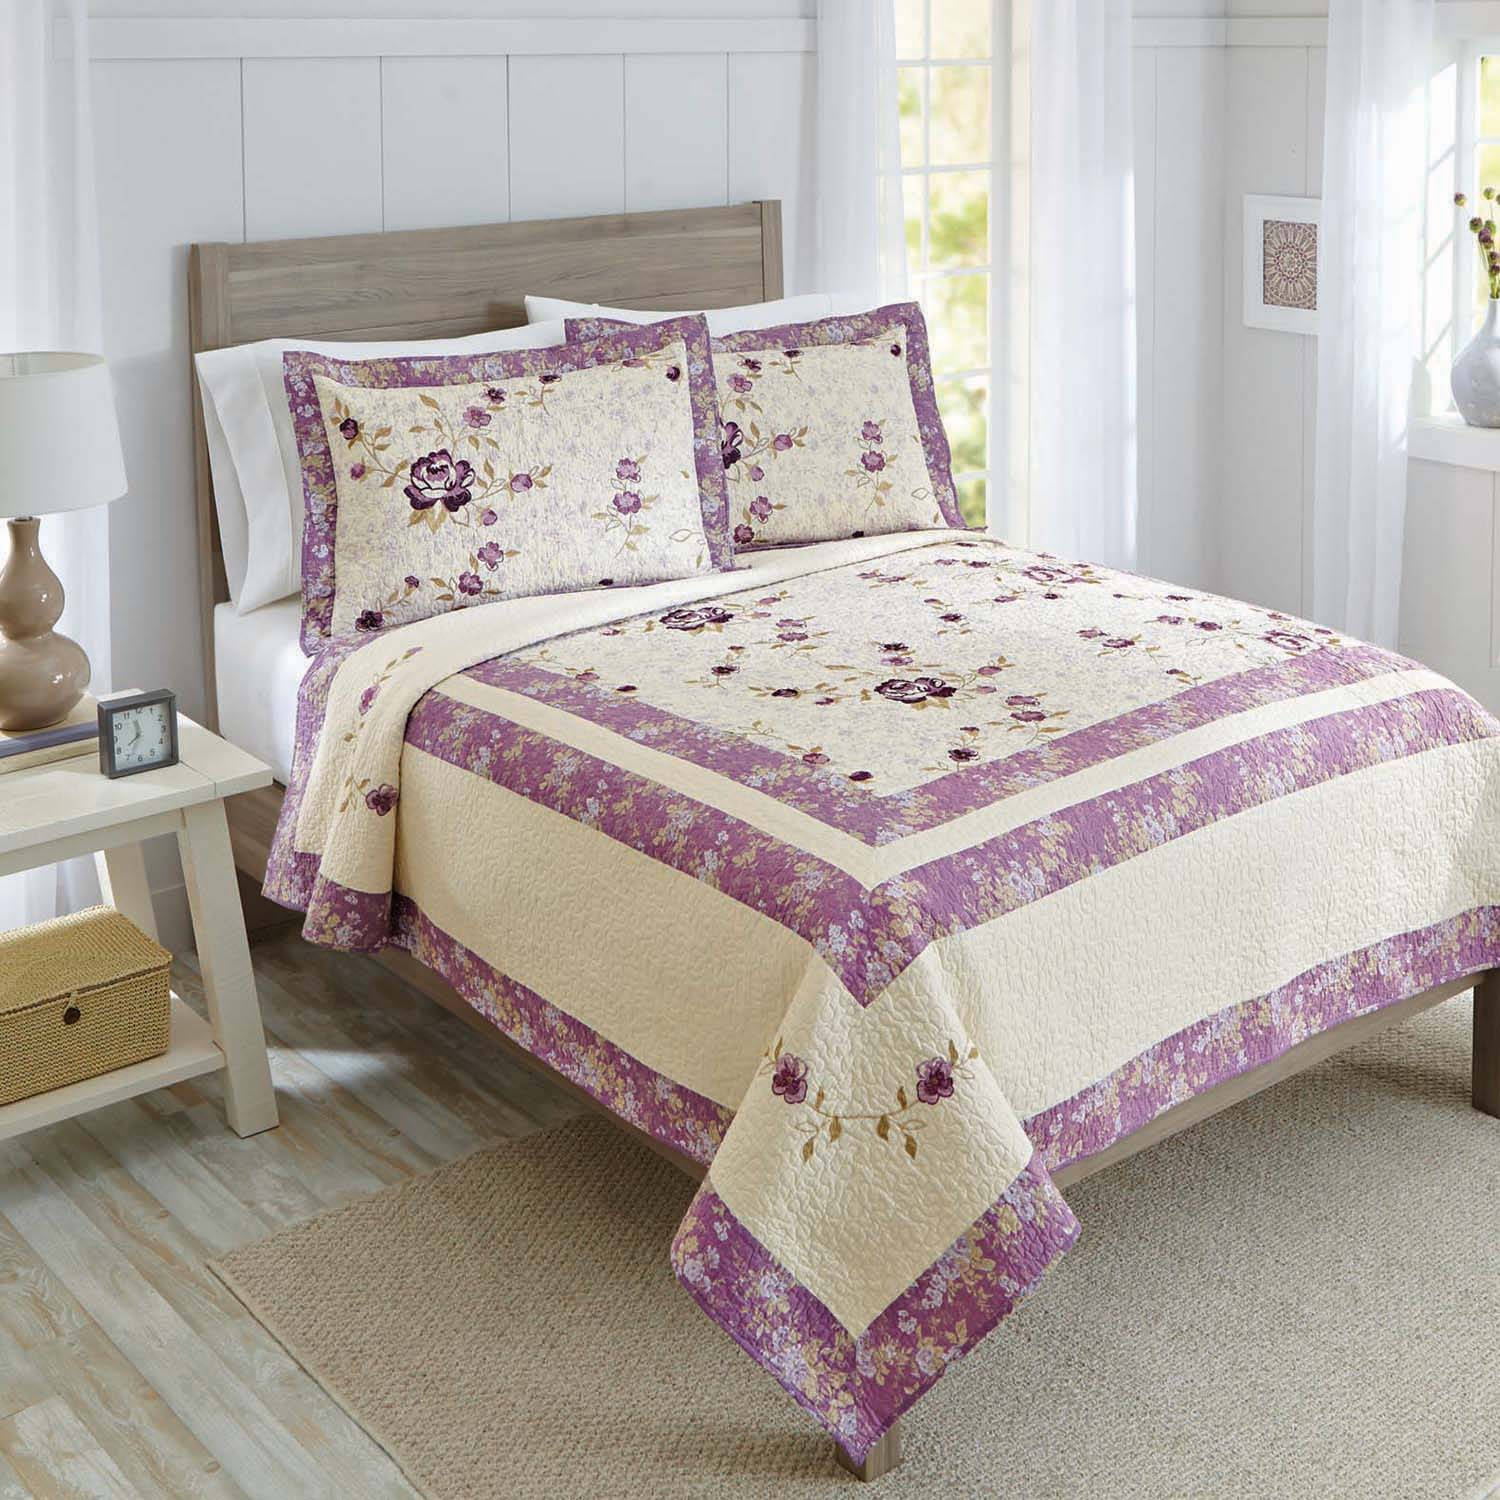 Better Homes Gardens Purple Blossom Quilt Collection 1 Each